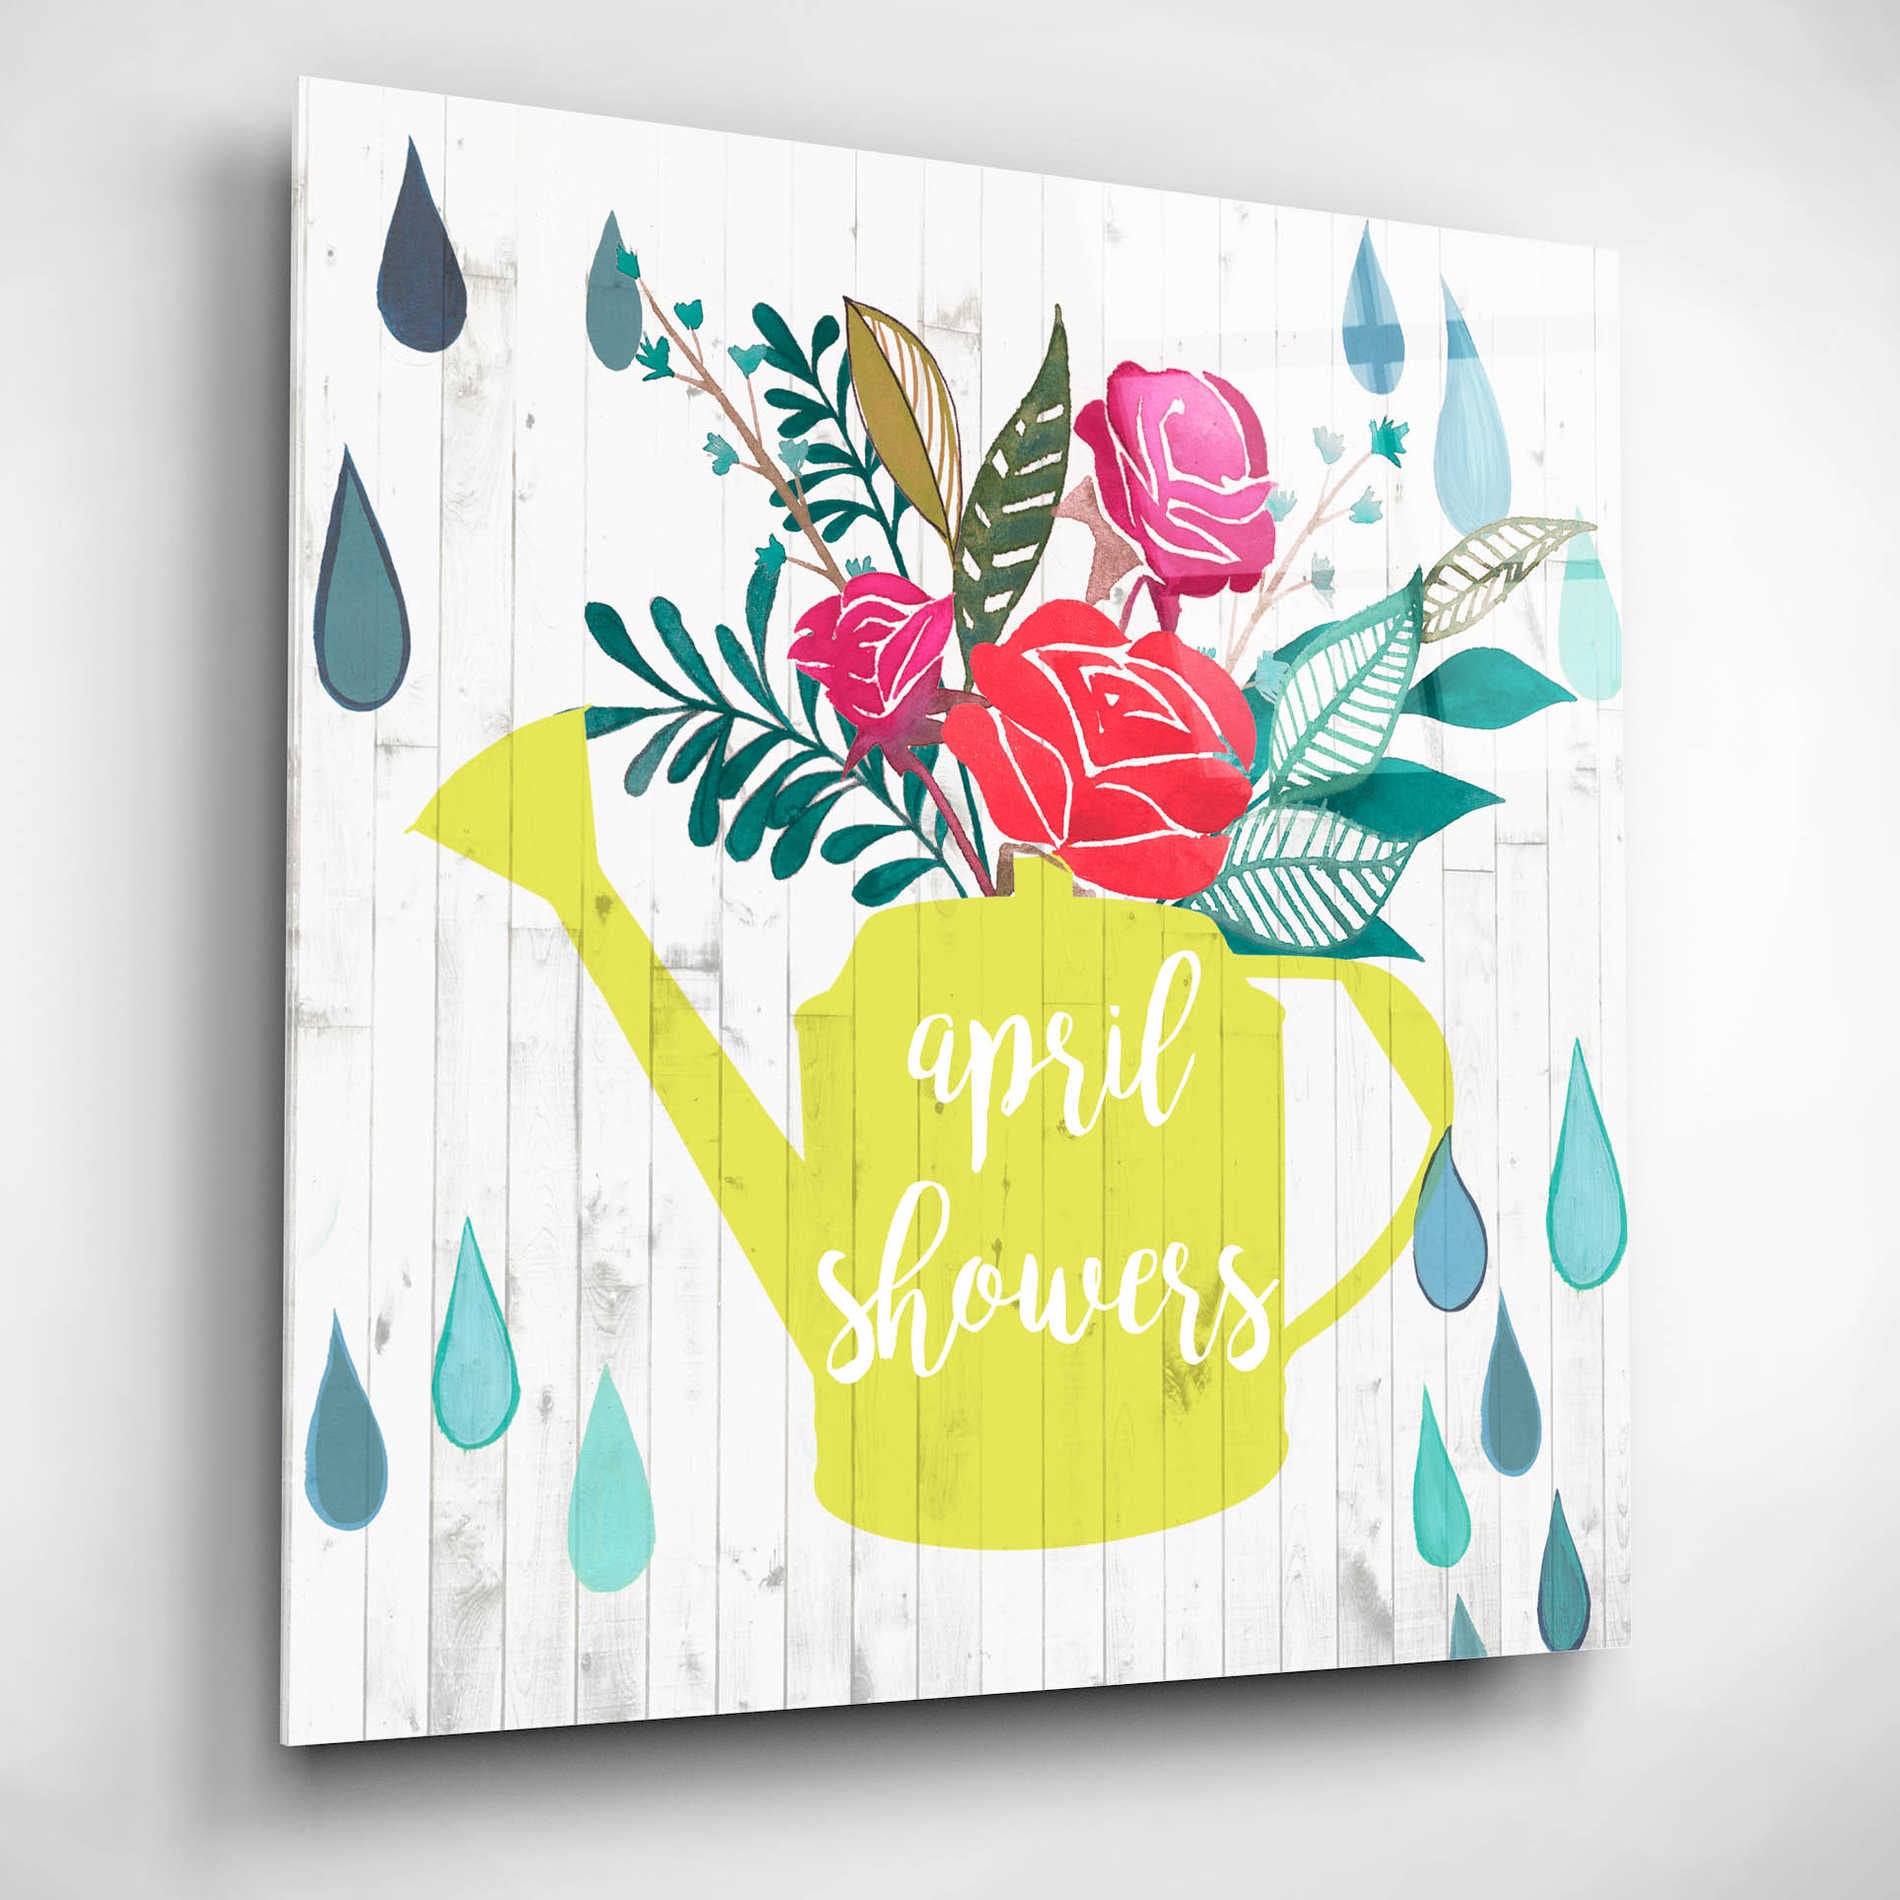 Epic Art 'April Showers and May Flowers I' by Studio W, Acrylic Glass Wall Art,12x12